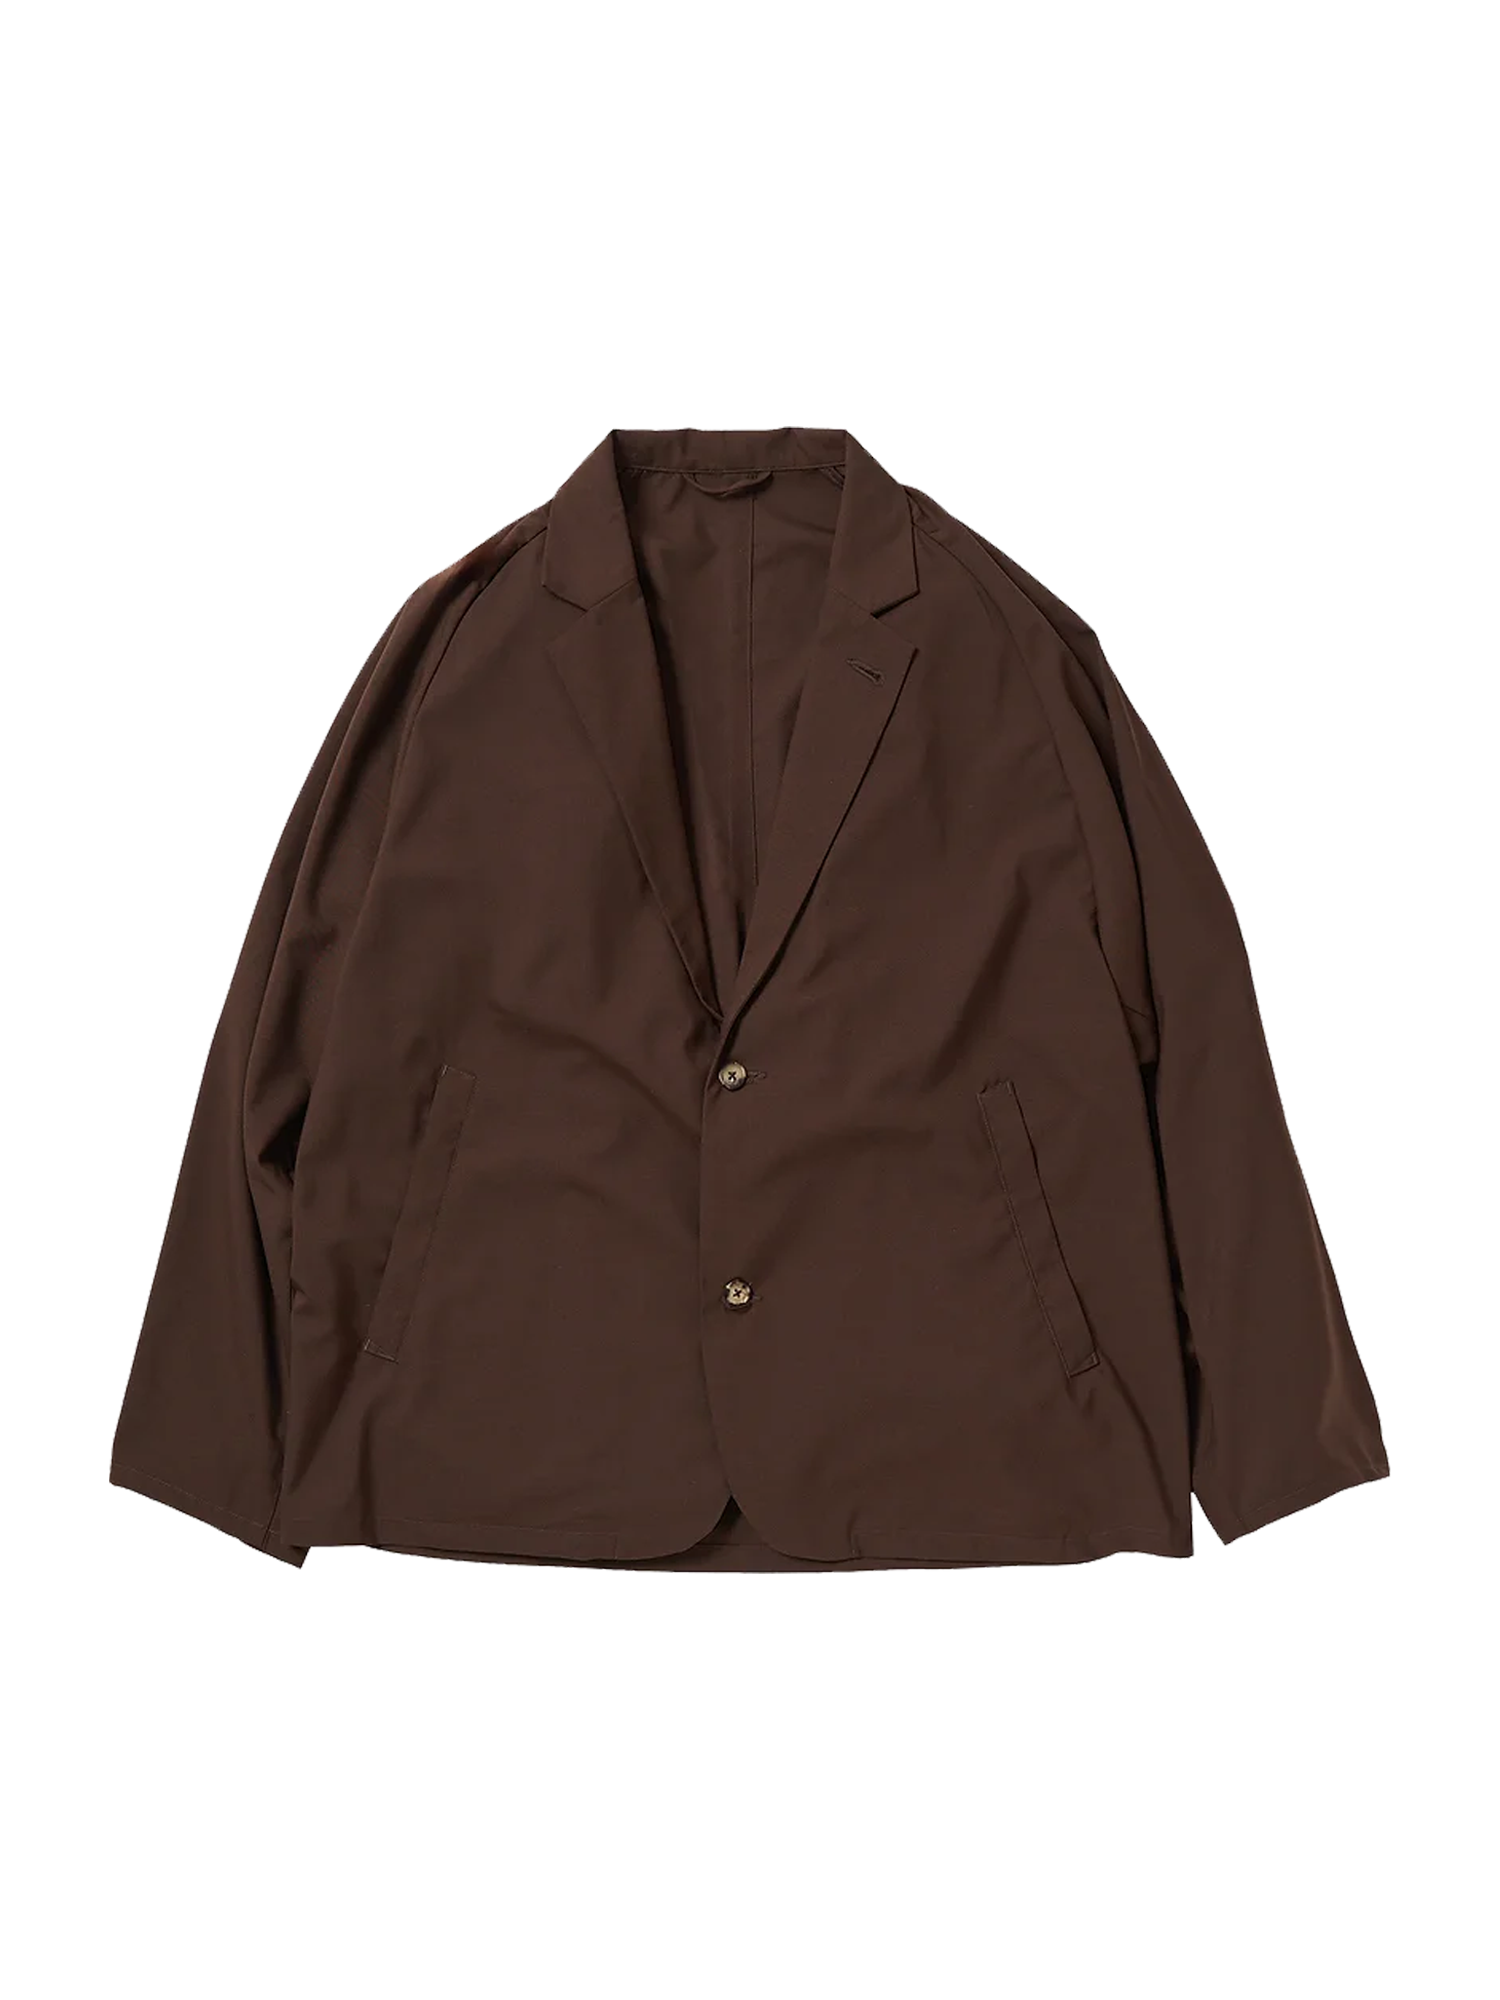 Sillage - Jacket - Two Button - Jacket - Brown